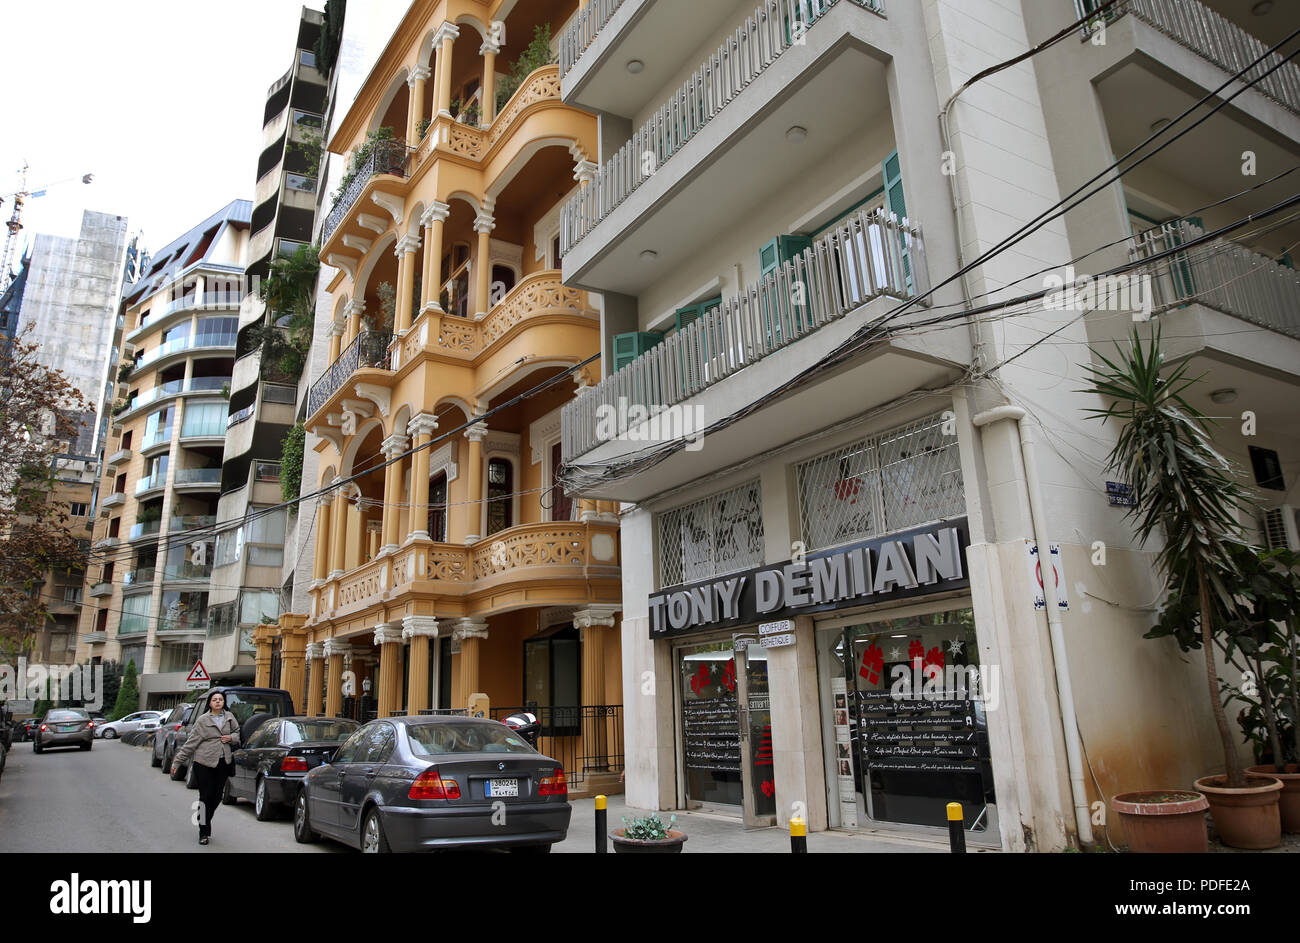 Beirut's remaining architectural heritage is in danger. Demolition of old buildings is a daily event where high-rise flats are taking over the city. Stock Photo